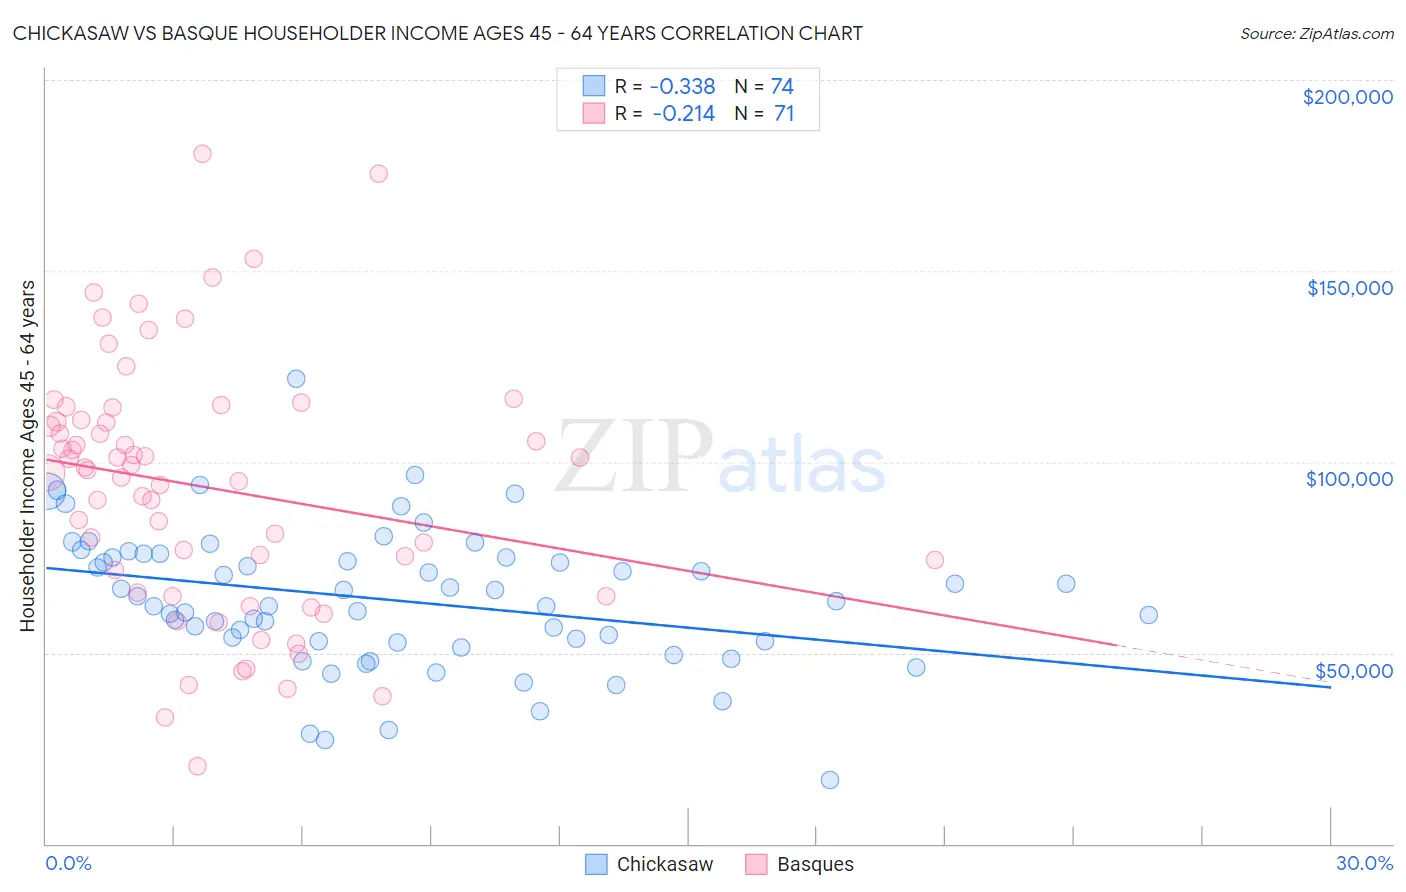 Chickasaw vs Basque Householder Income Ages 45 - 64 years